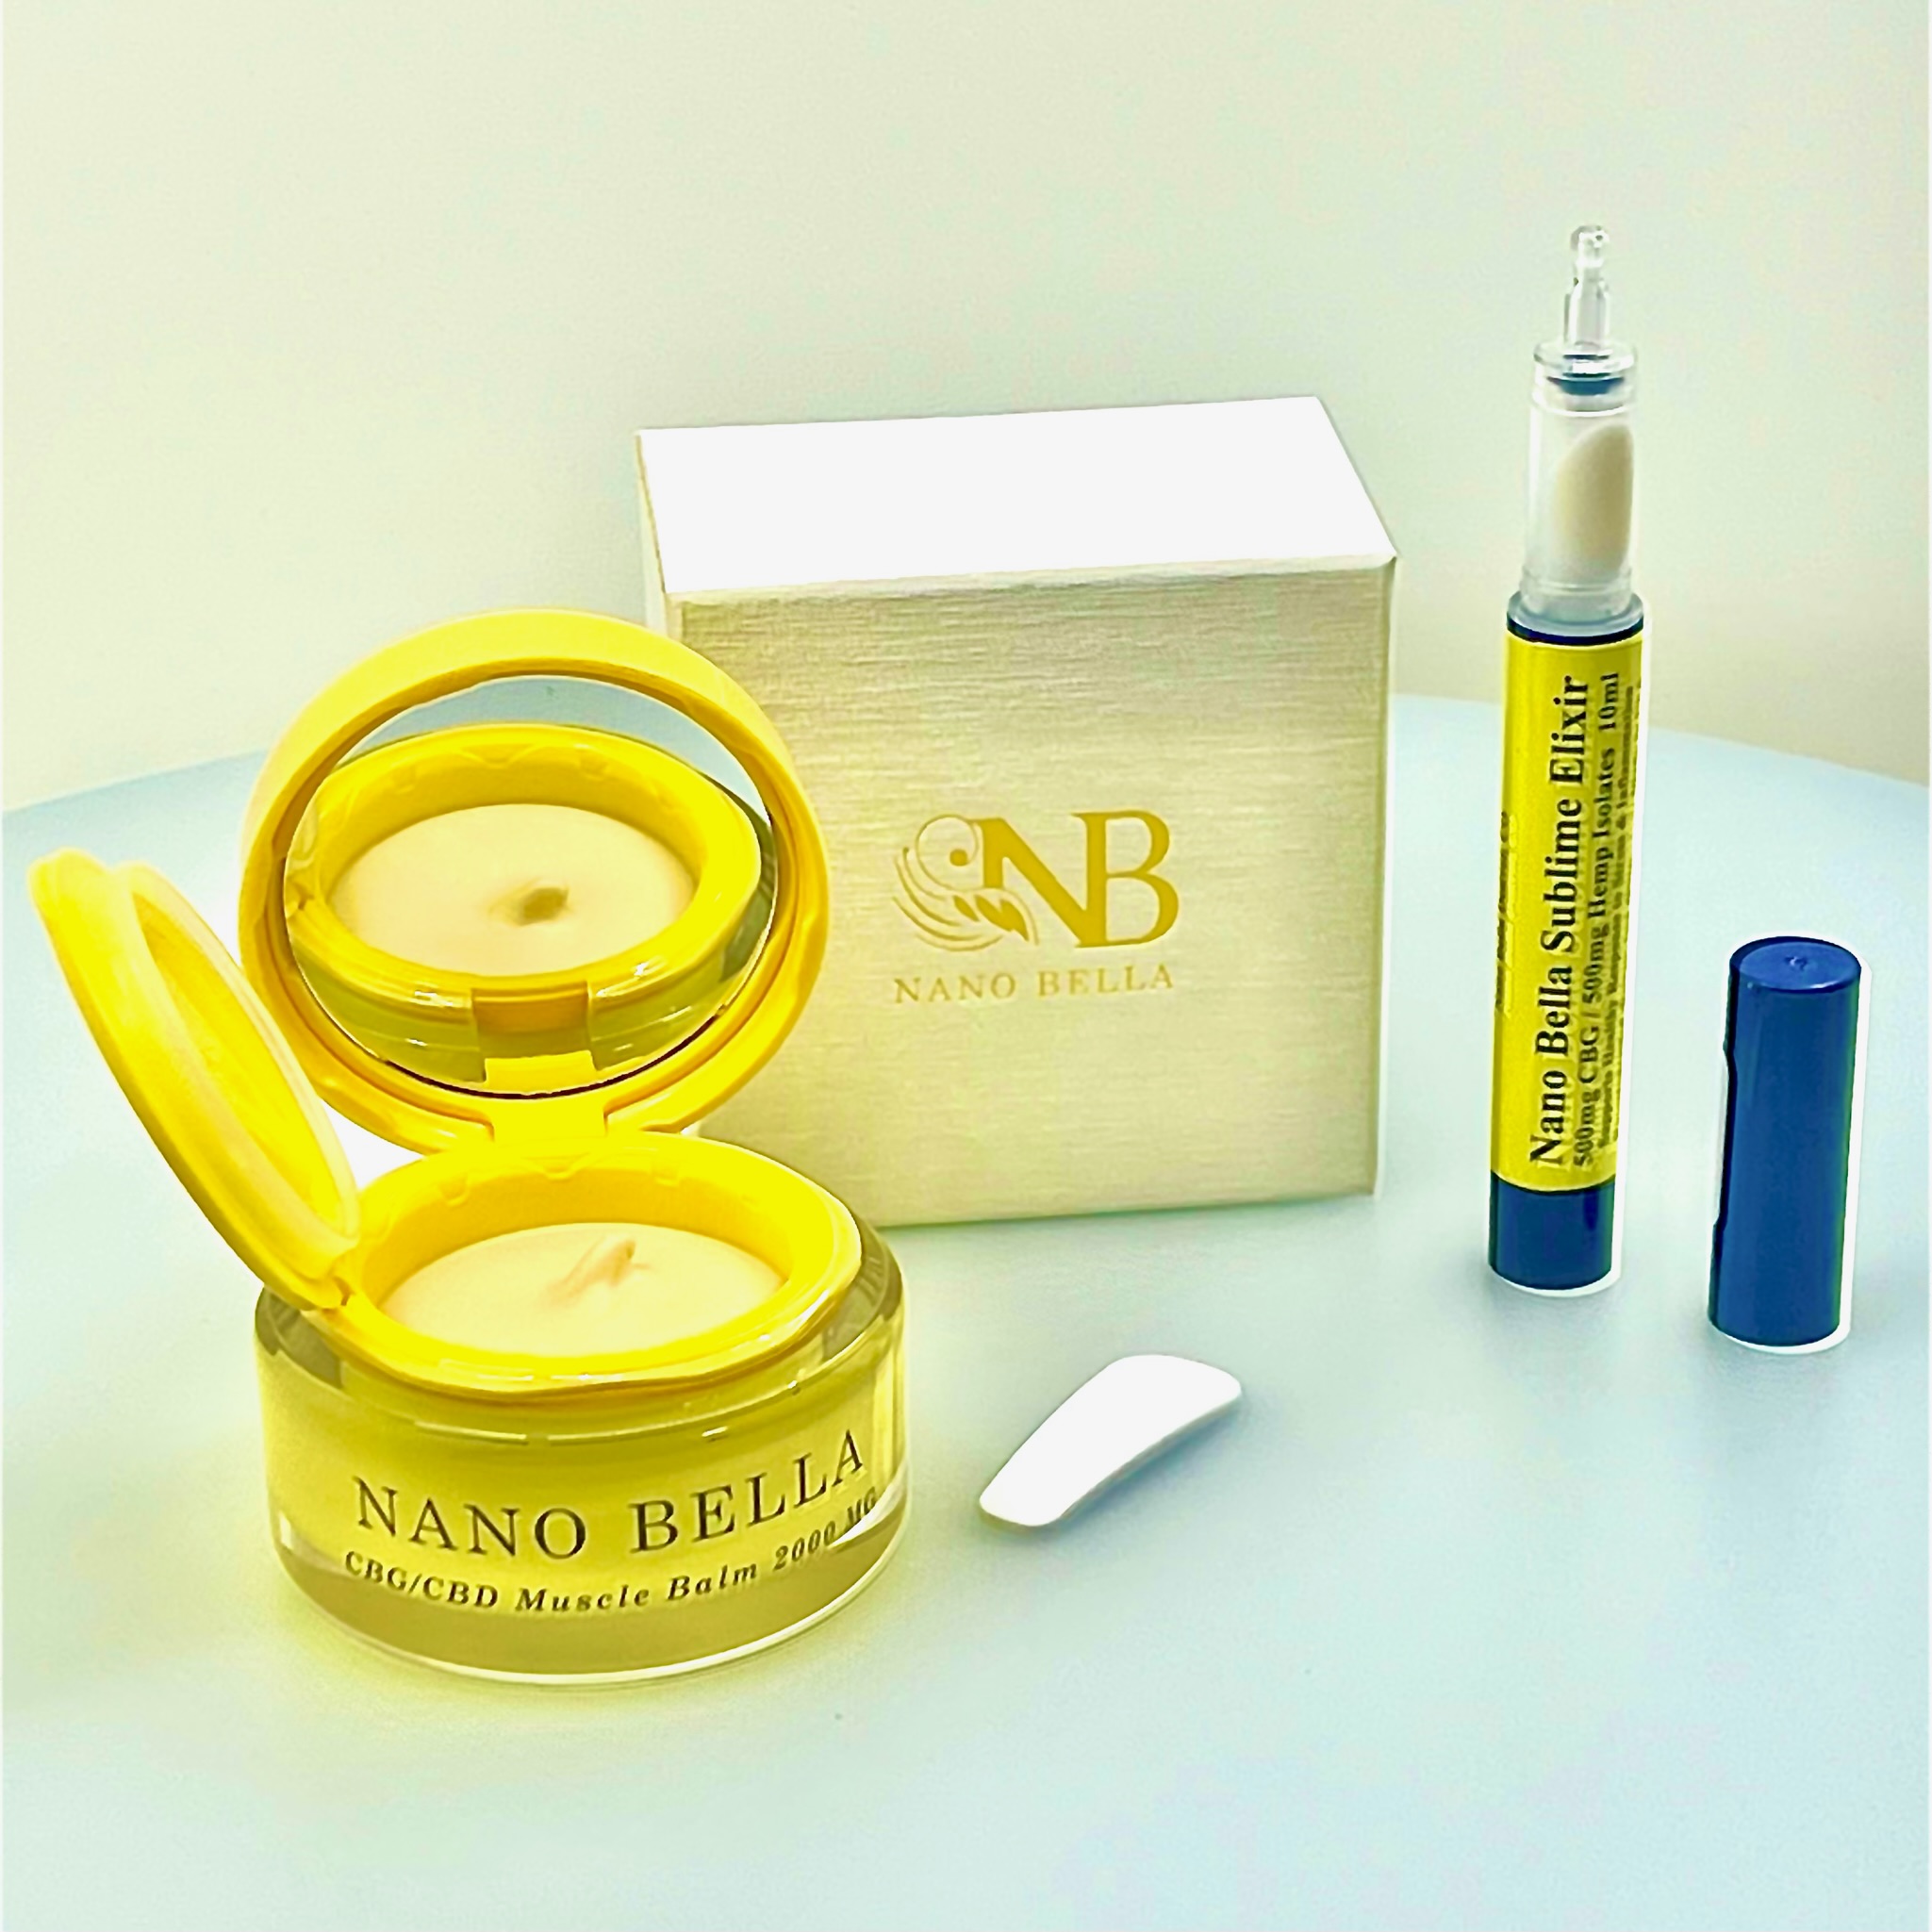 nano bella's cog products. Our mission is to find effective pain, stress, sleep solutions